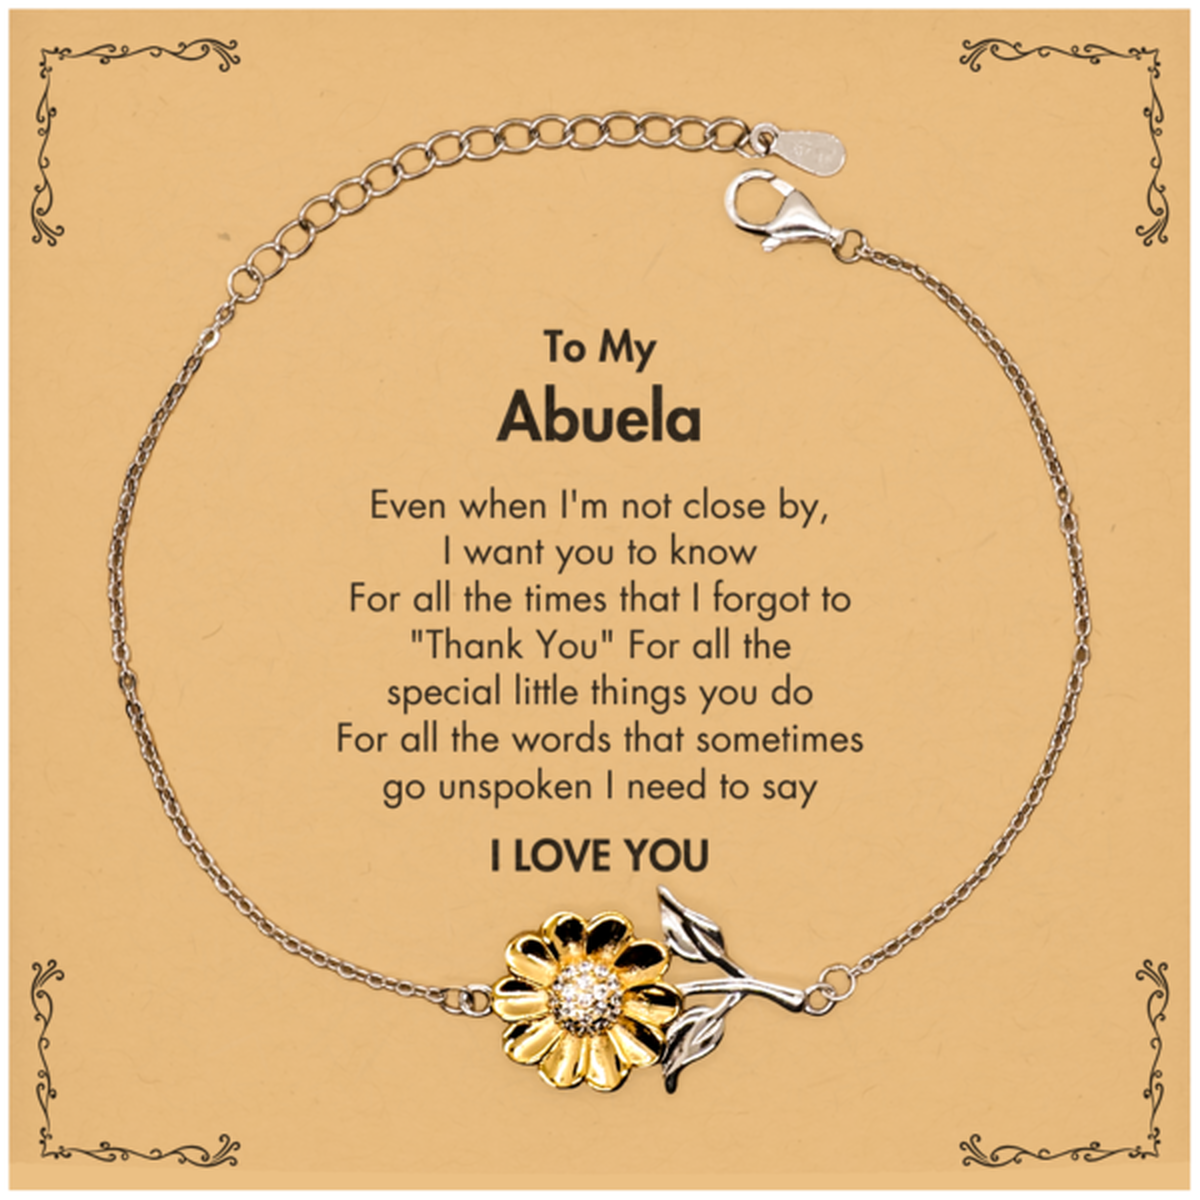 Thank You Gifts for Abuela, Keepsake Sunflower Bracelet Gifts for Abuela Birthday Mother's day Father's Day Abuela For all the words That sometimes go unspoken I need to say I LOVE YOU